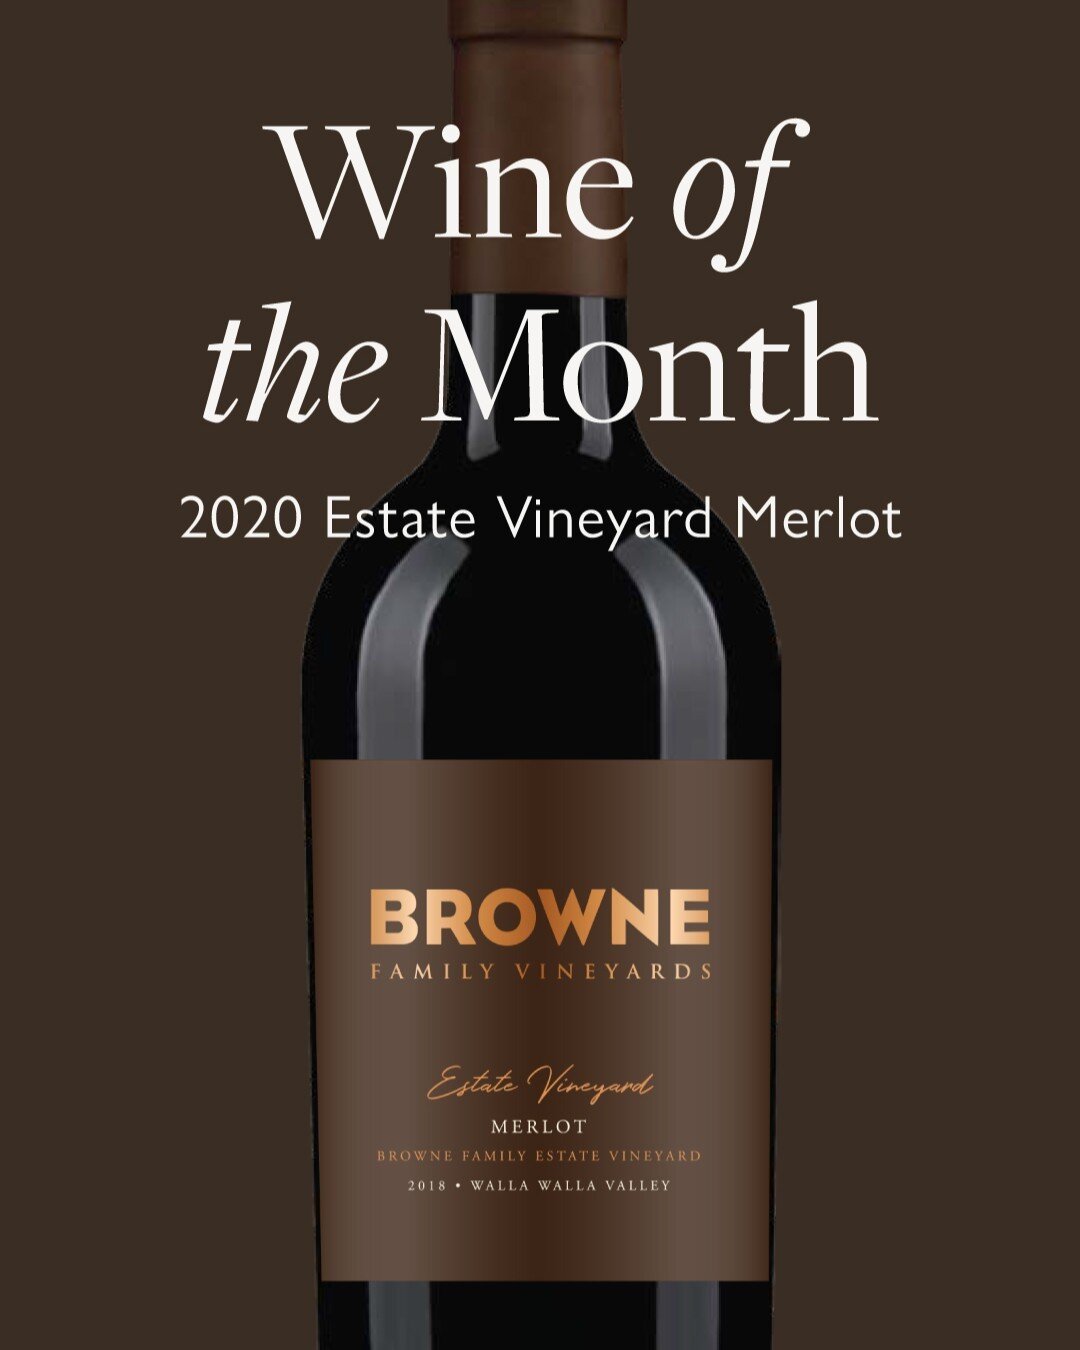 Happy International Merlot Day!🍷 Pick up the Browne 20' Estate Vineyard Merlot to celebrate today or try throughout the month!